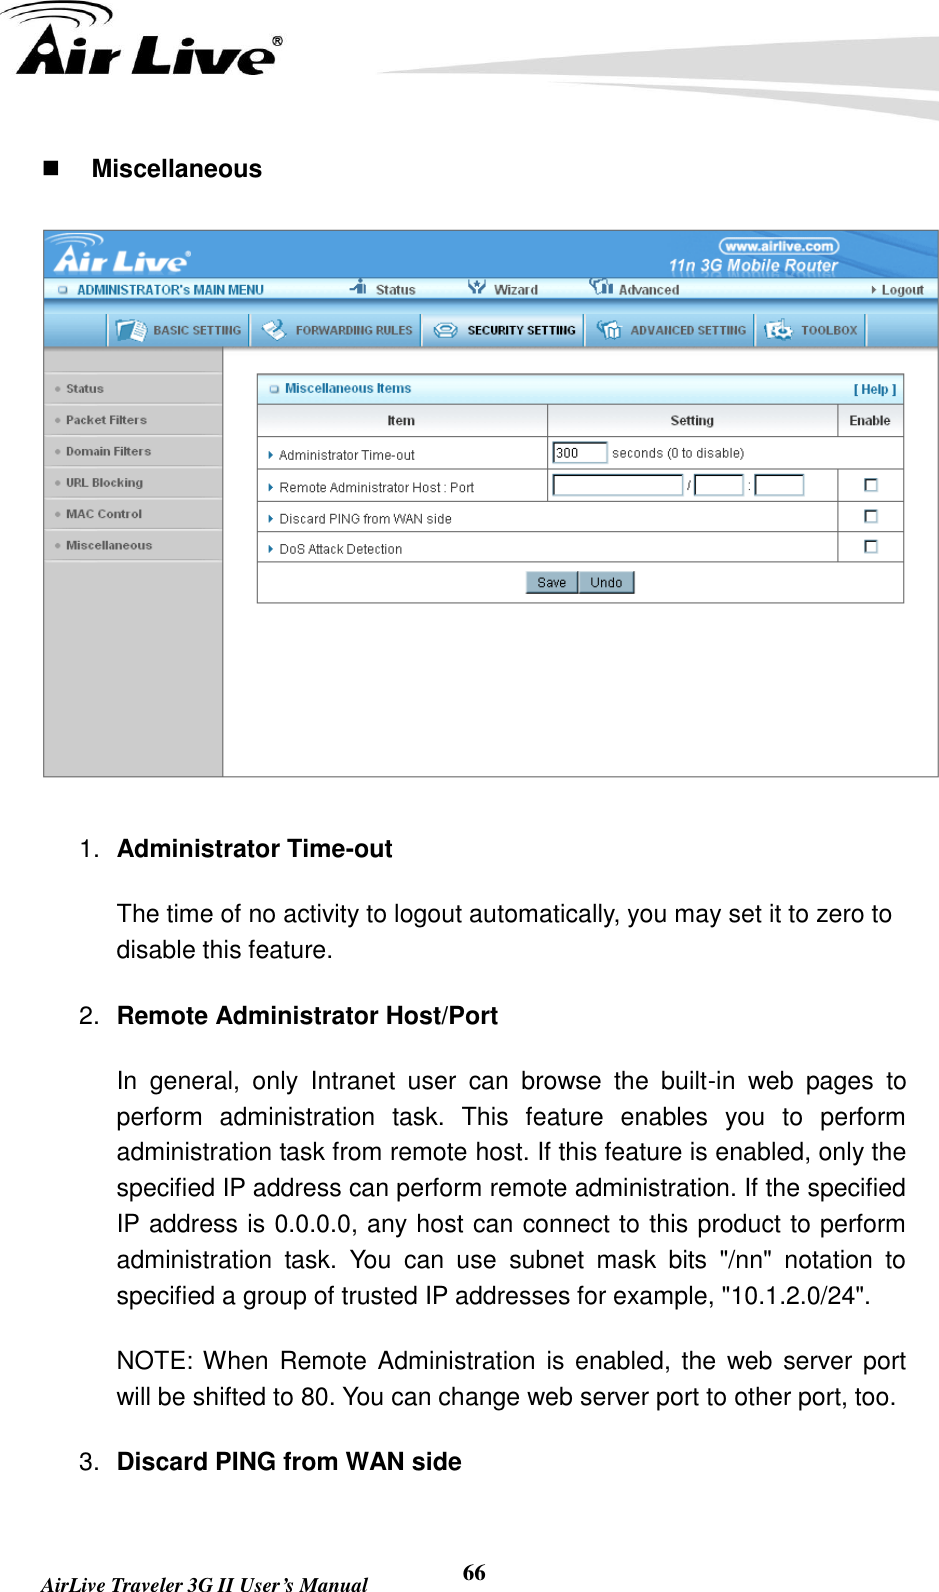   AirLive Traveler 3G II User’s Manual 66  Miscellaneous  1. Administrator Time-out The time of no activity to logout automatically, you may set it to zero to disable this feature. 2. Remote Administrator Host/Port In  general,  only  Intranet  user  can  browse  the  built-in  web  pages  to perform  administration  task.  This  feature  enables  you  to  perform administration task from remote host. If this feature is enabled, only the specified IP address can perform remote administration. If the specified IP address is 0.0.0.0, any host can connect to this product to perform administration  task.  You  can  use  subnet  mask  bits  &quot;/nn&quot;  notation  to specified a group of trusted IP addresses for example, &quot;10.1.2.0/24&quot;.   NOTE: When Remote  Administration is  enabled, the  web server  port will be shifted to 80. You can change web server port to other port, too. 3. Discard PING from WAN side 